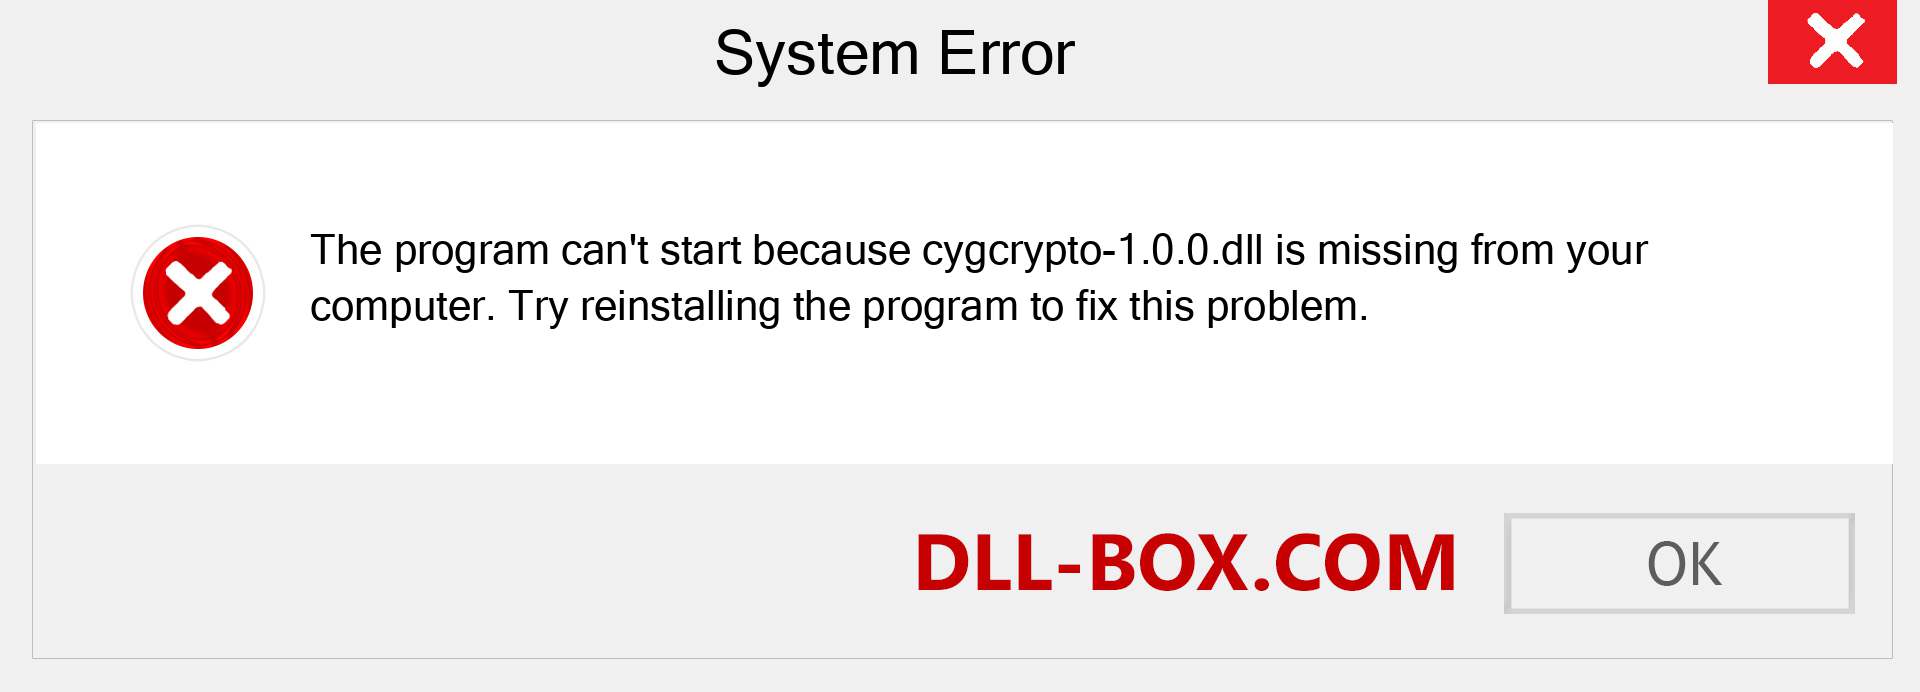  cygcrypto-1.0.0.dll file is missing?. Download for Windows 7, 8, 10 - Fix  cygcrypto-1.0.0 dll Missing Error on Windows, photos, images